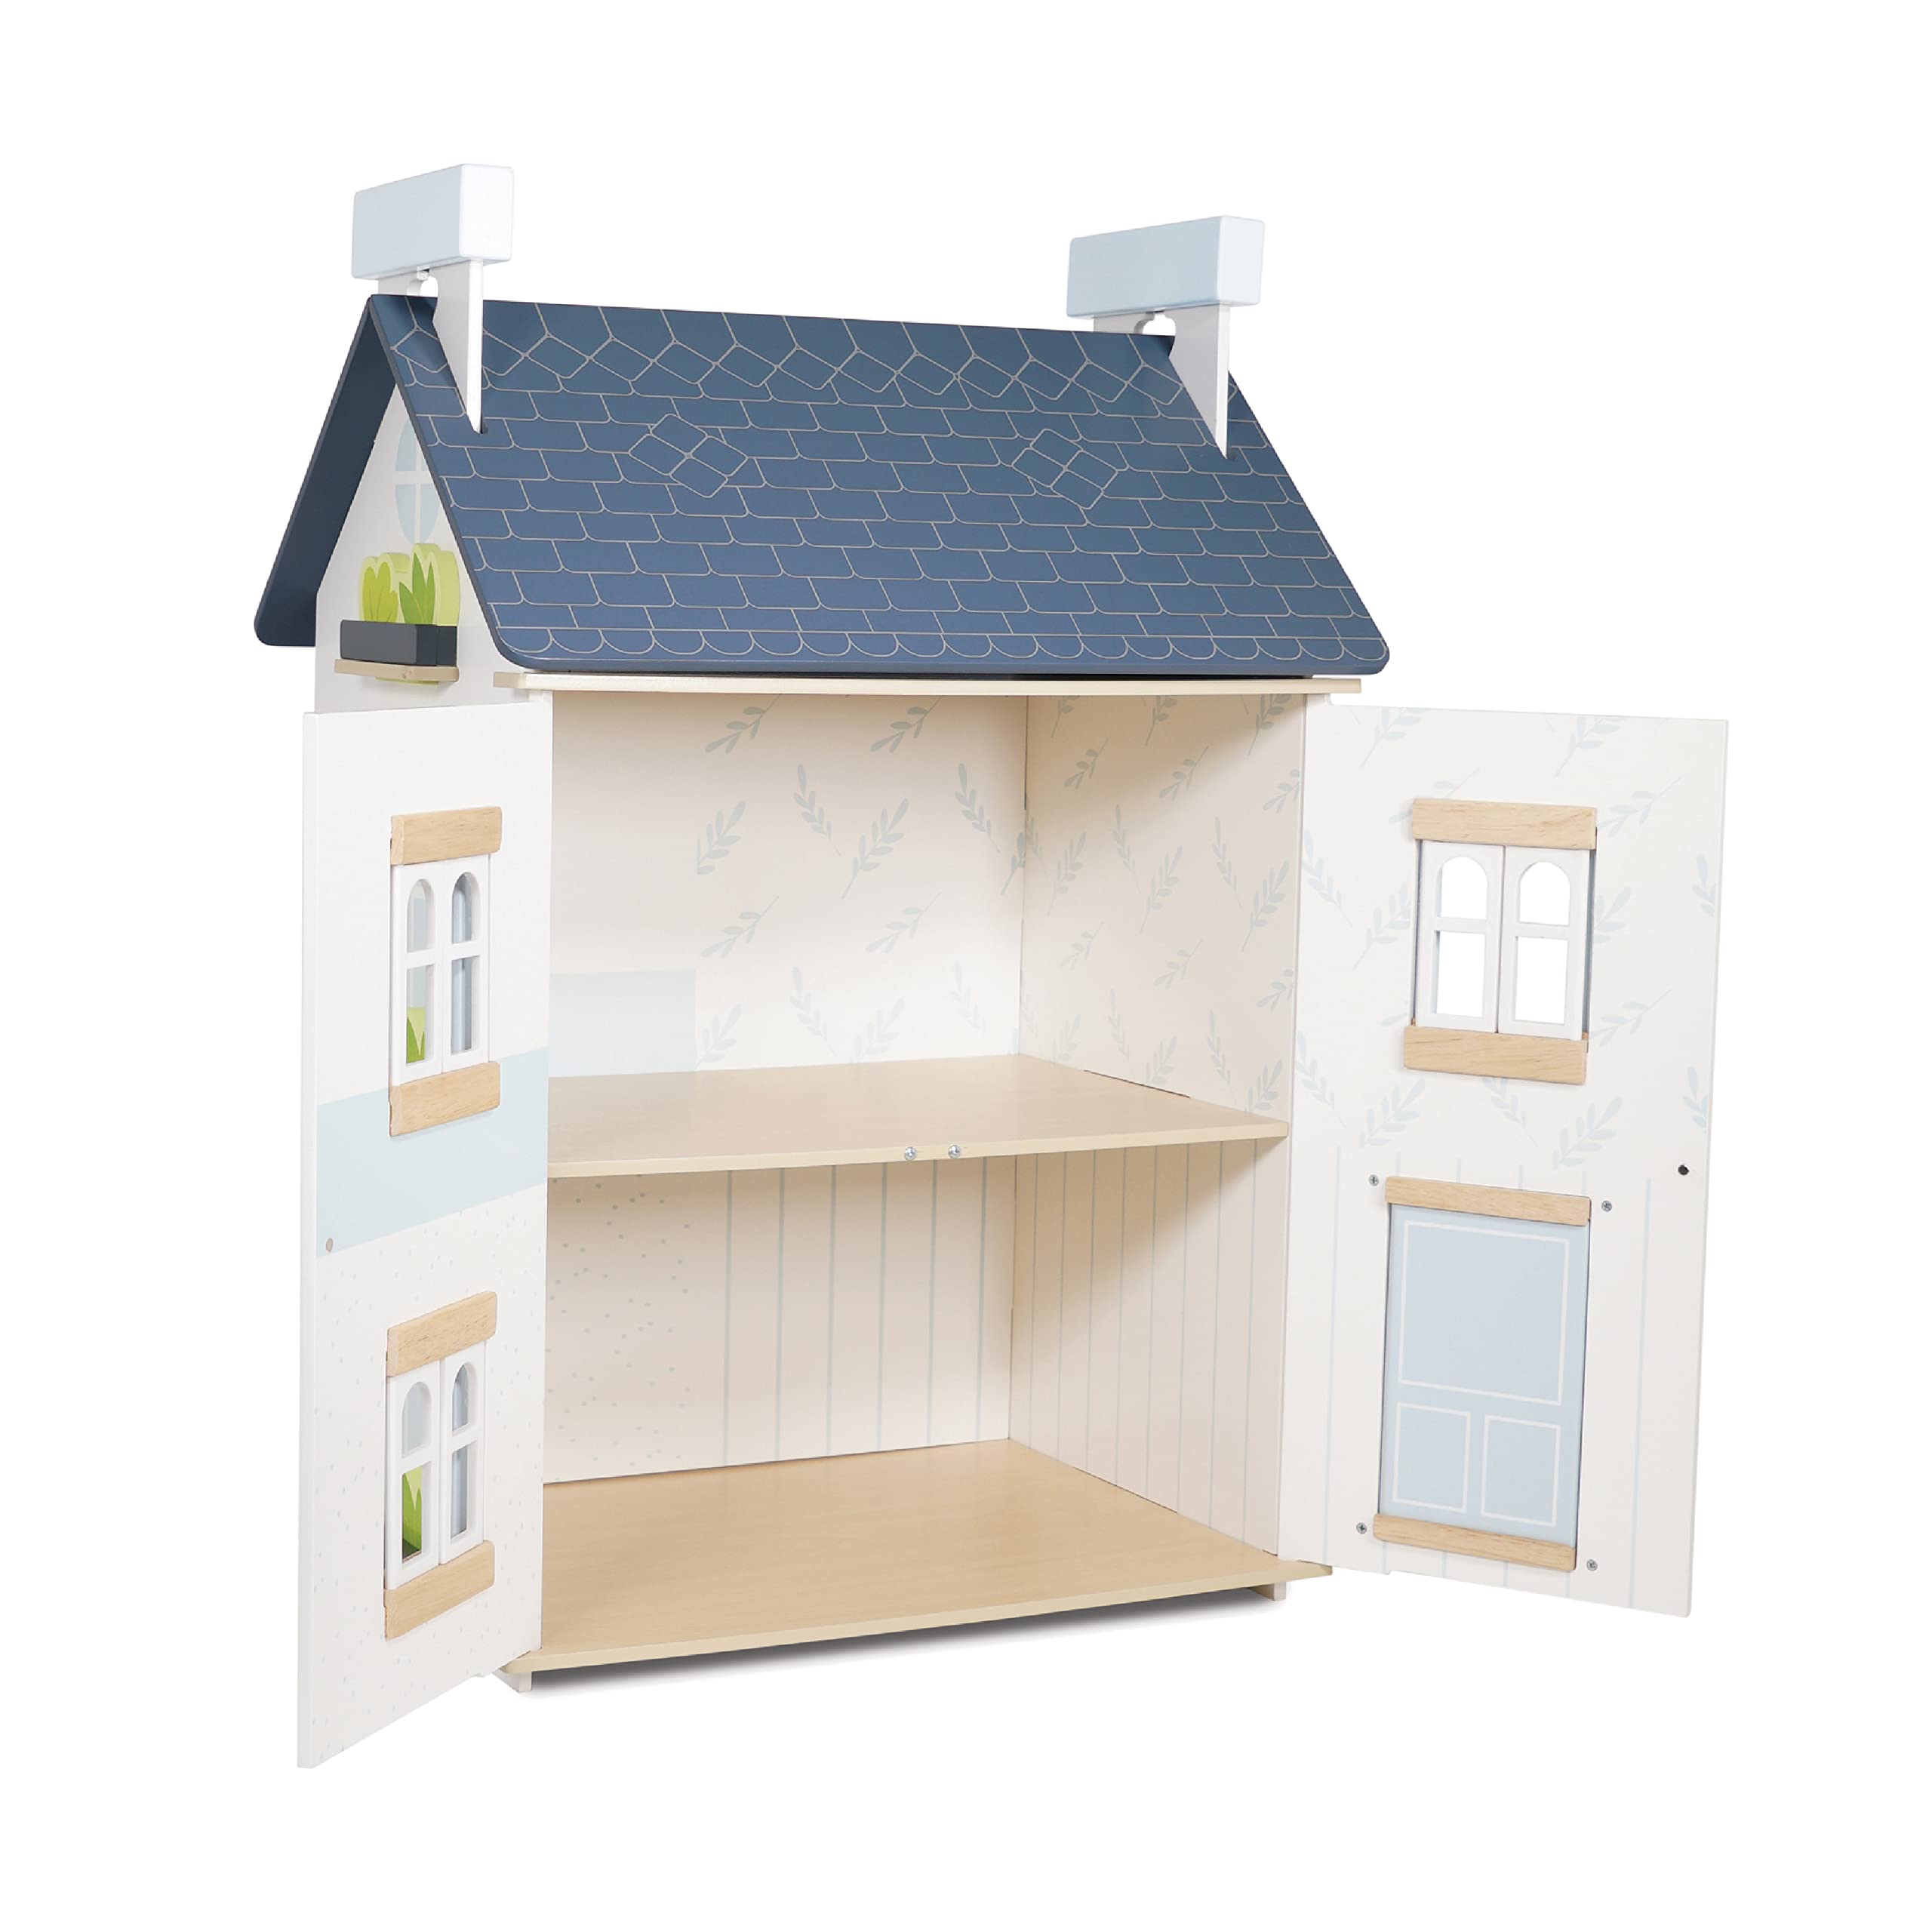 Le Toy Van - Wooden- Sky Doll House - Kids Dream House - 2 Storey with Attic - Fill with Dollhouse Accessories - Suitable for Ages 3+